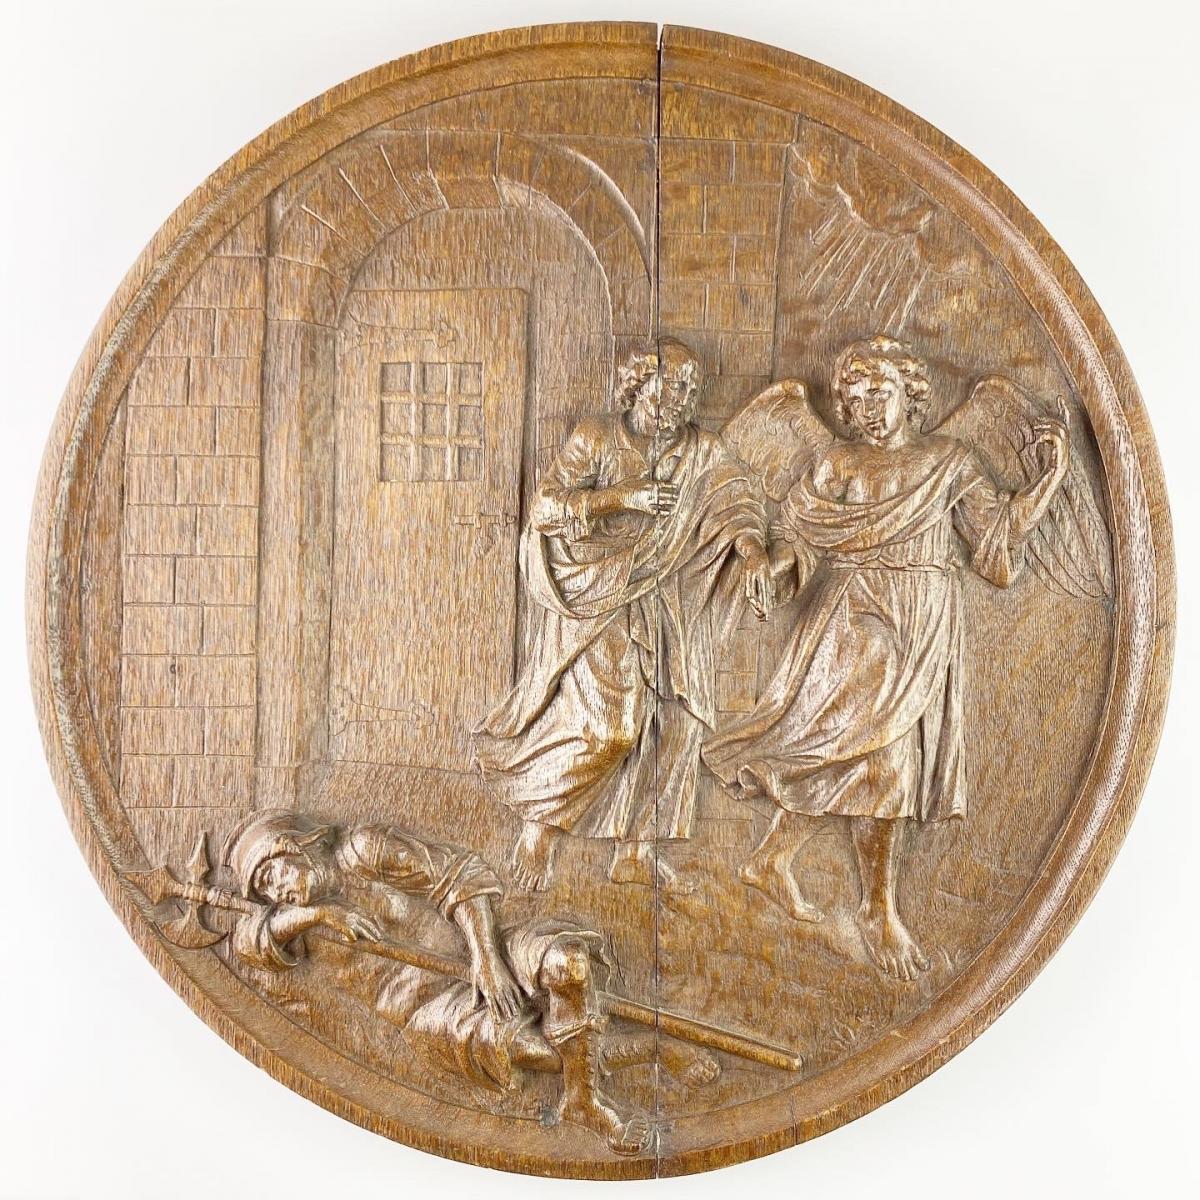 Tondo of Saint Peter’s escape. Southern Germany, early 18th century